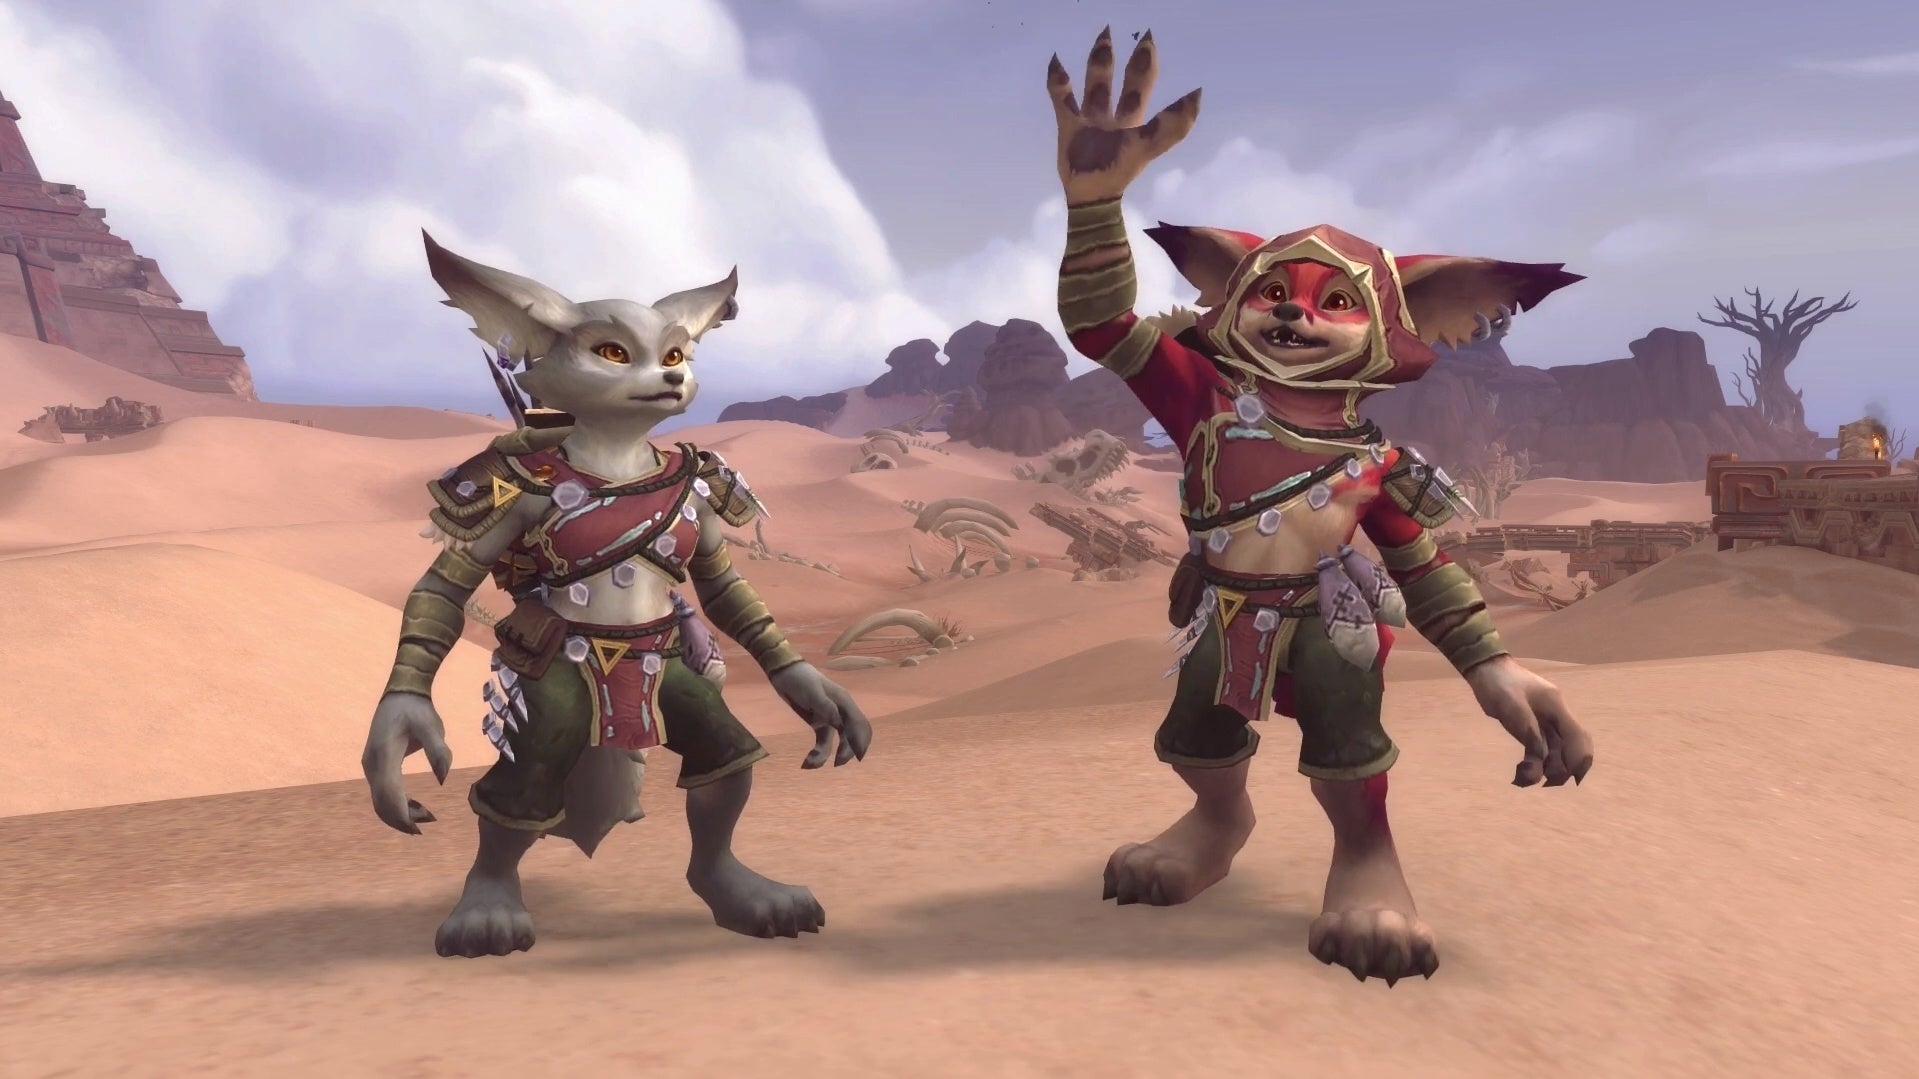 Image for World of Warcraft is getting a new playable race of adorable fox people